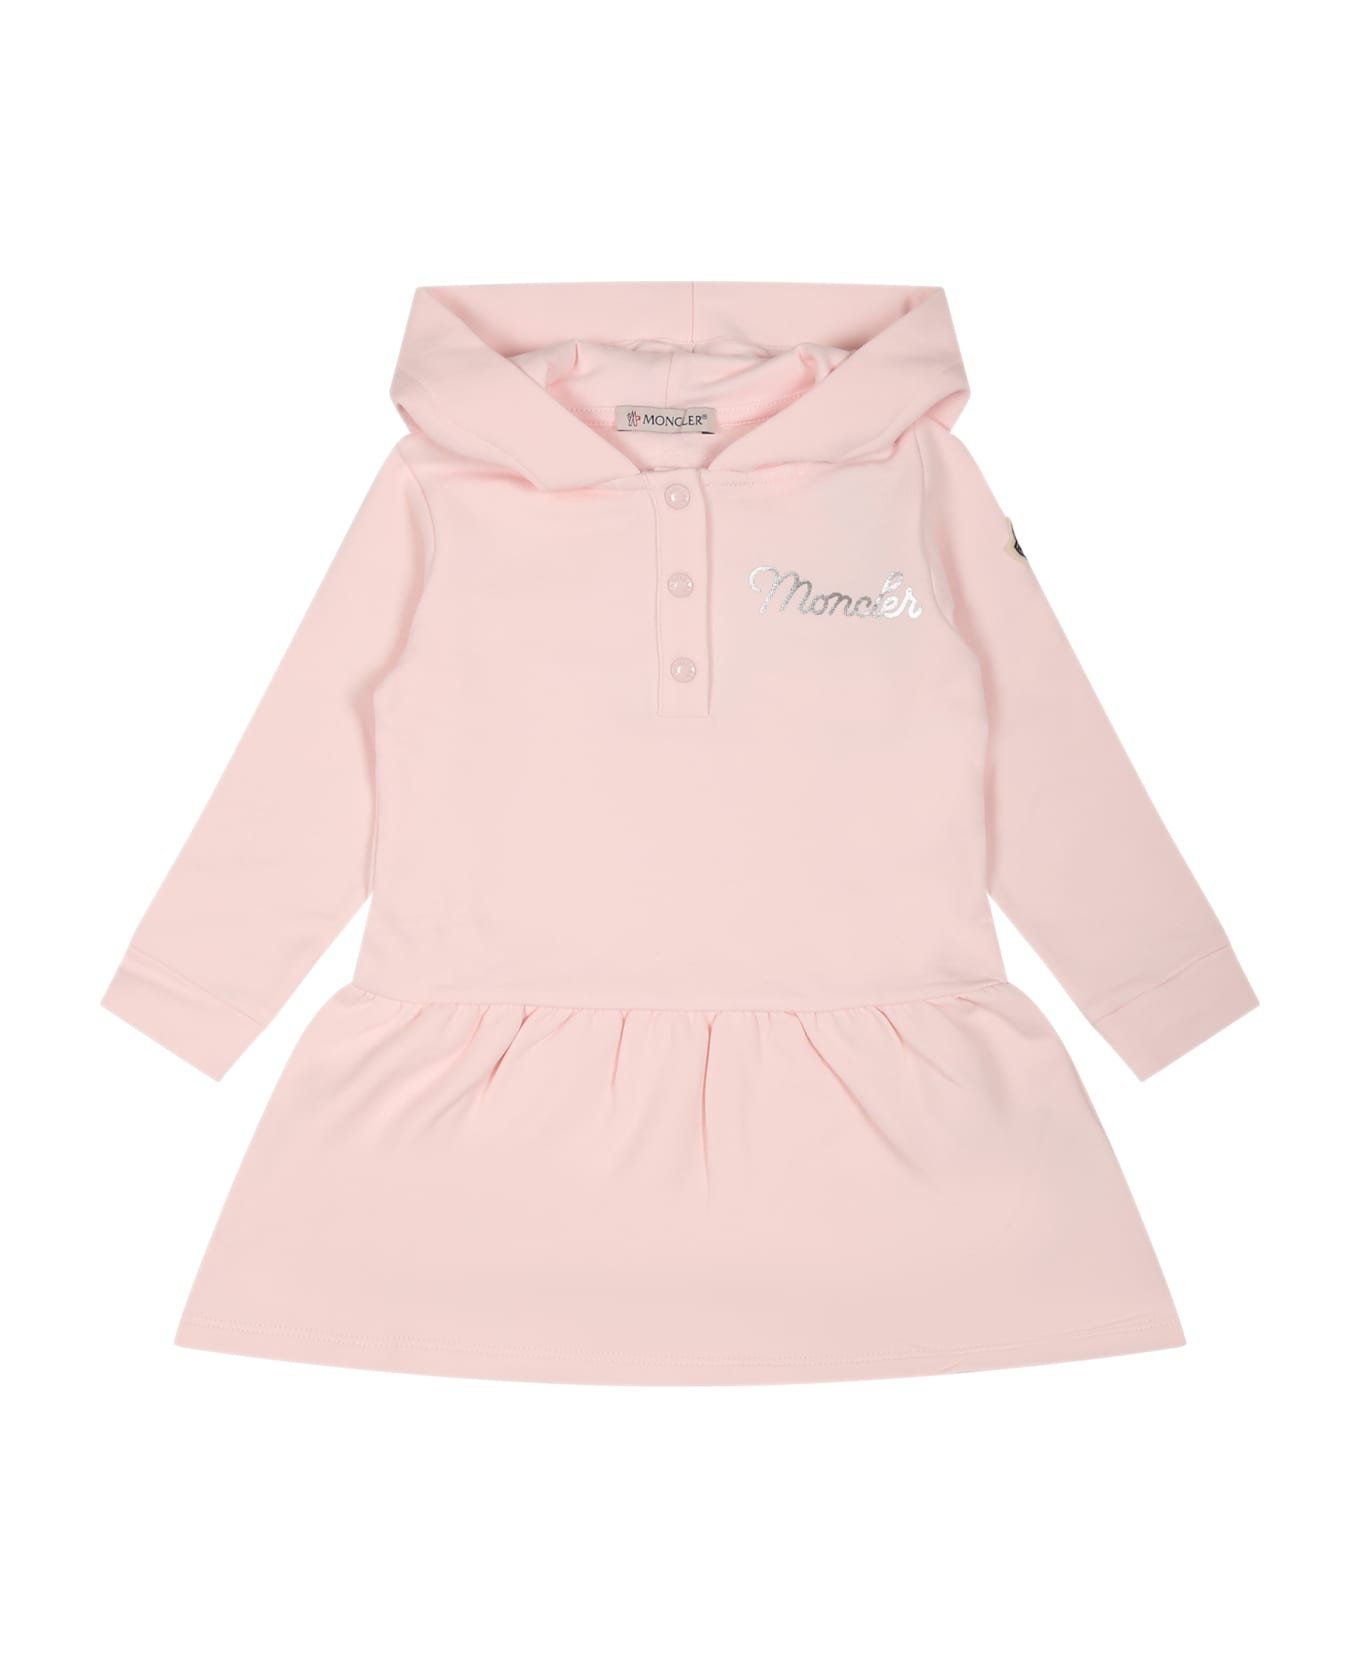 Moncler Pink Dress For Baby Girl With Logo - Pink